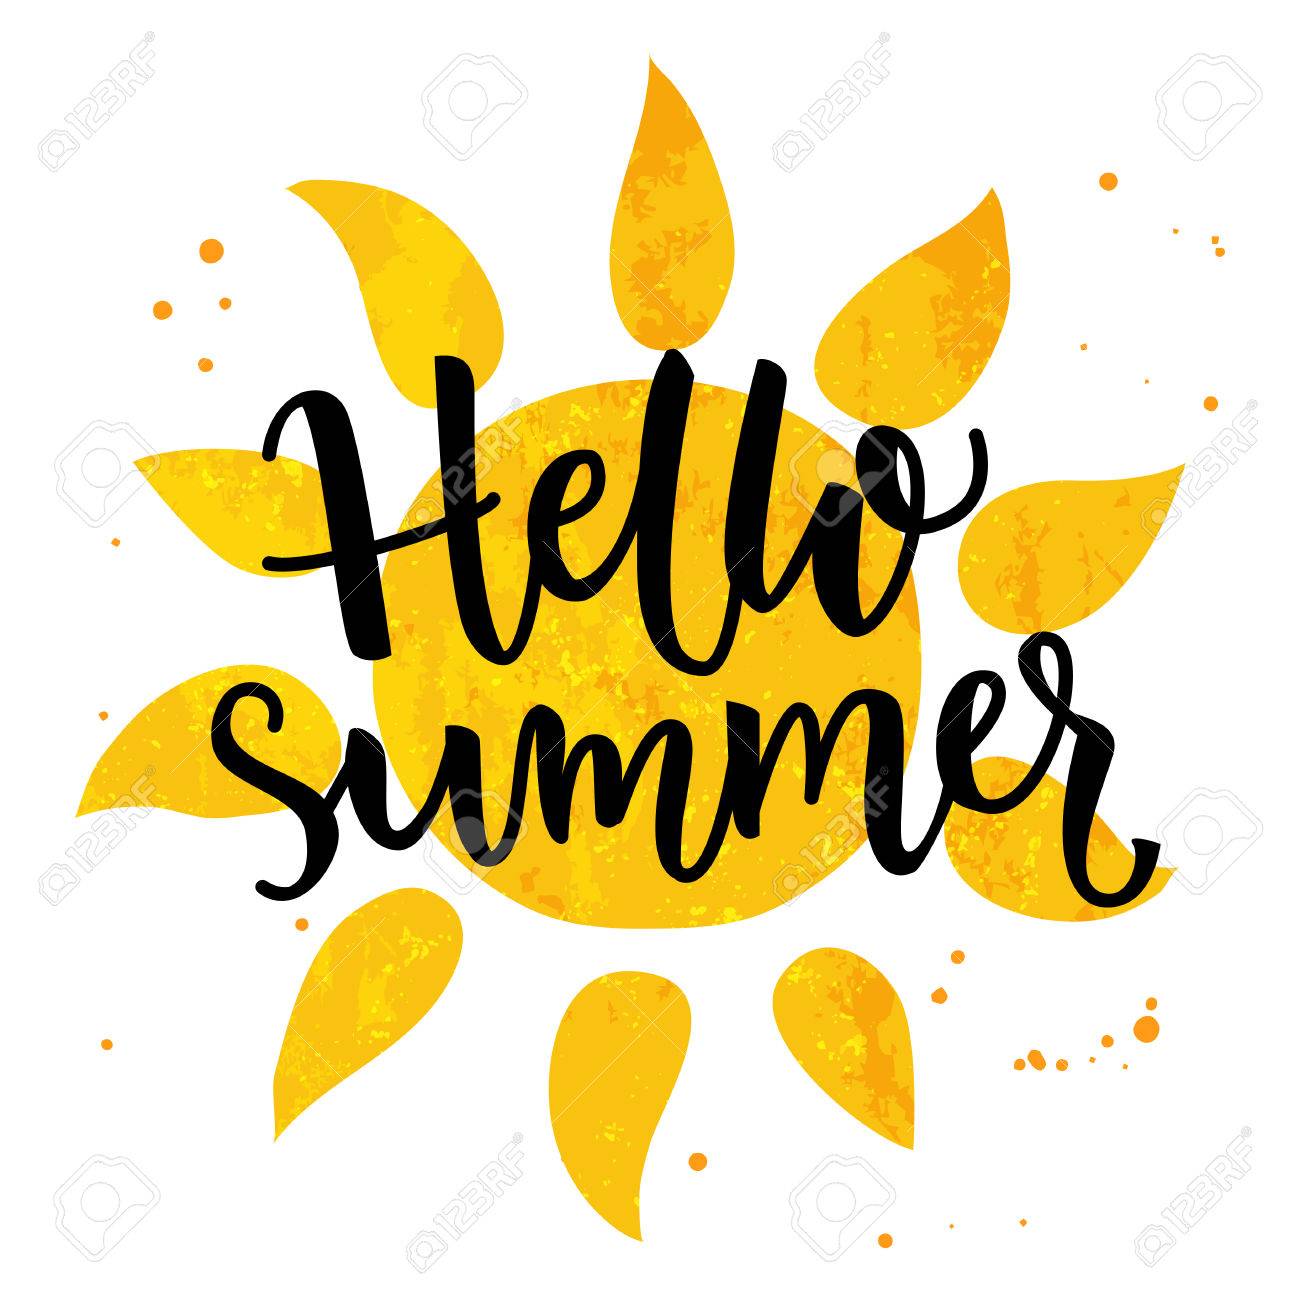 Hello summer banner. Typography poster with sun and lettering.